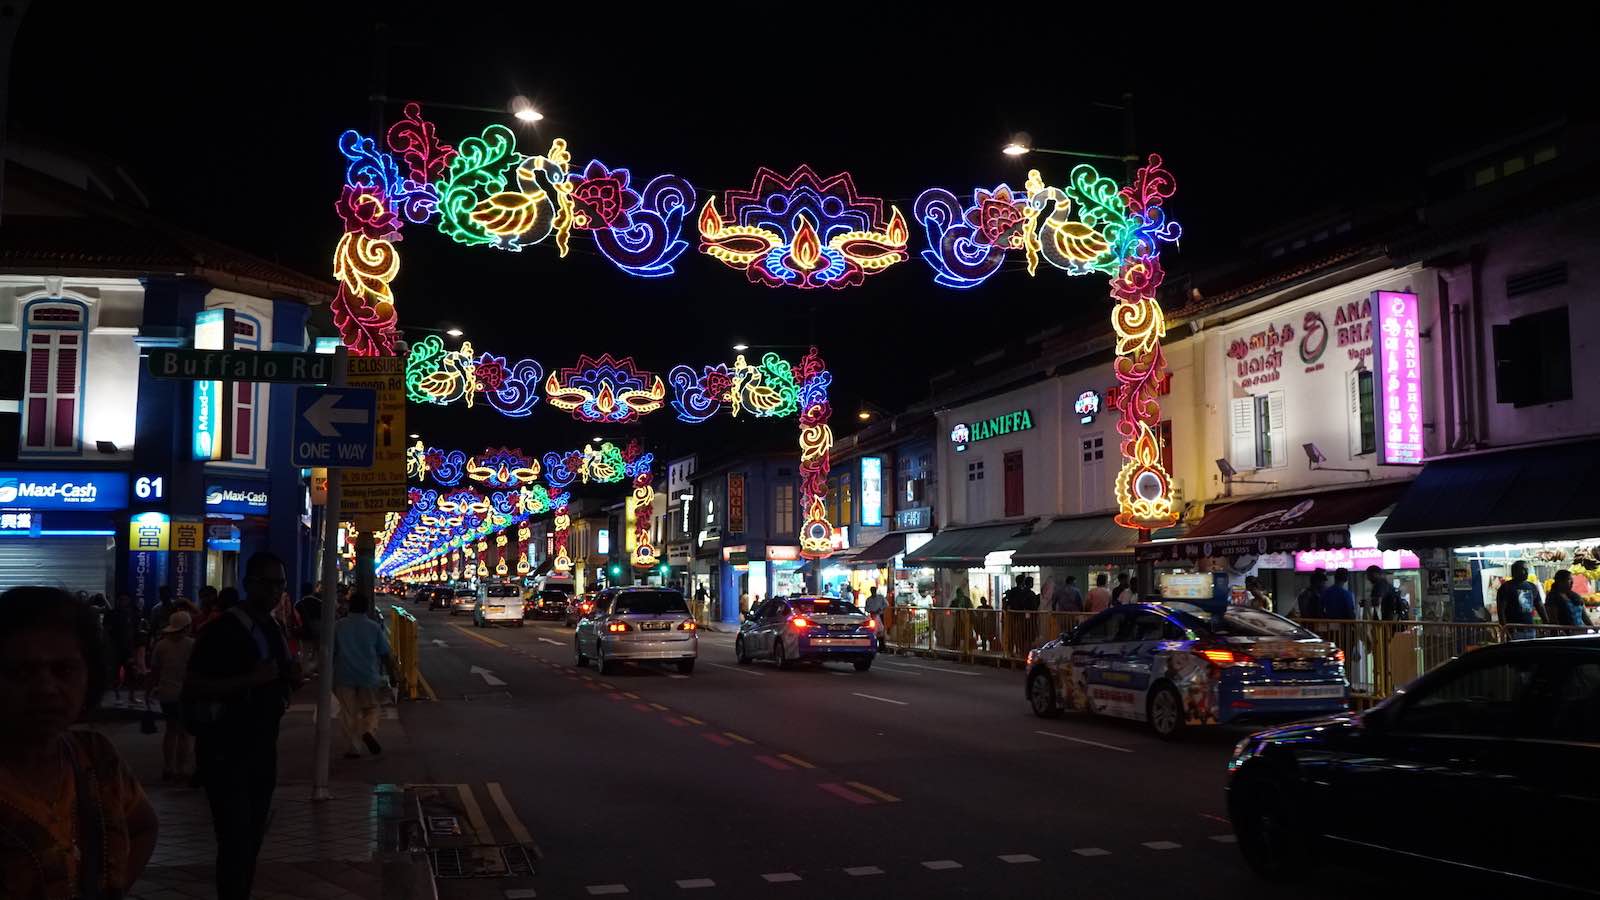 This was my view every night when I went back to my Airbnb, which was situated in the heart of Singapore's Little India. The community was gearing up for Diwali and the street outside my lodging was lit up and bustling every night.